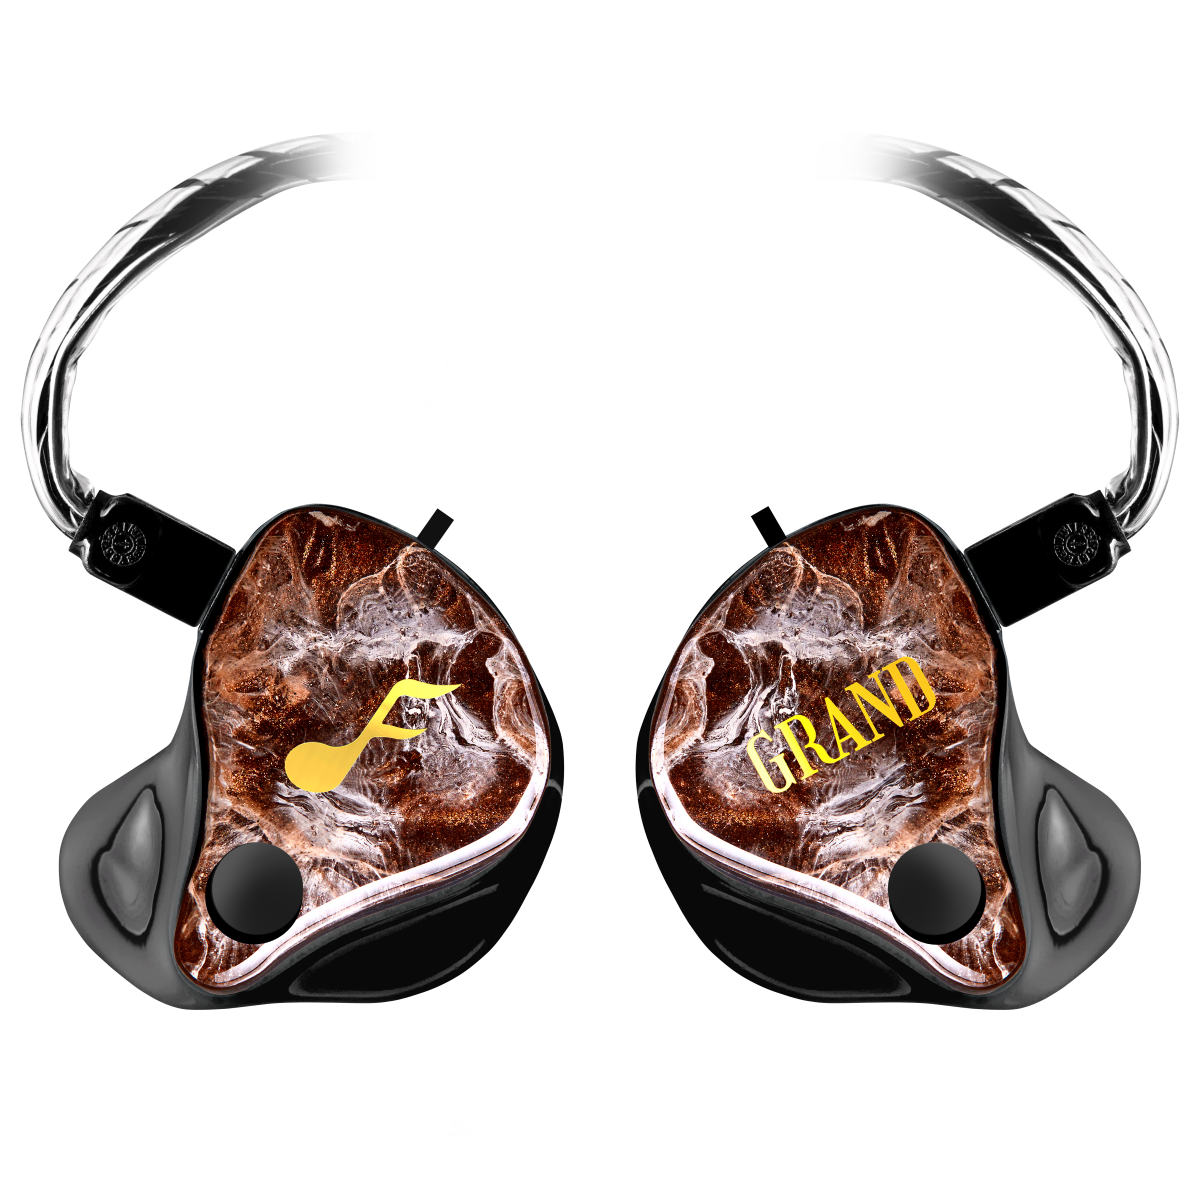 GRAND Maestro Custom IEM - Prices from 4726.00 to 4820.00